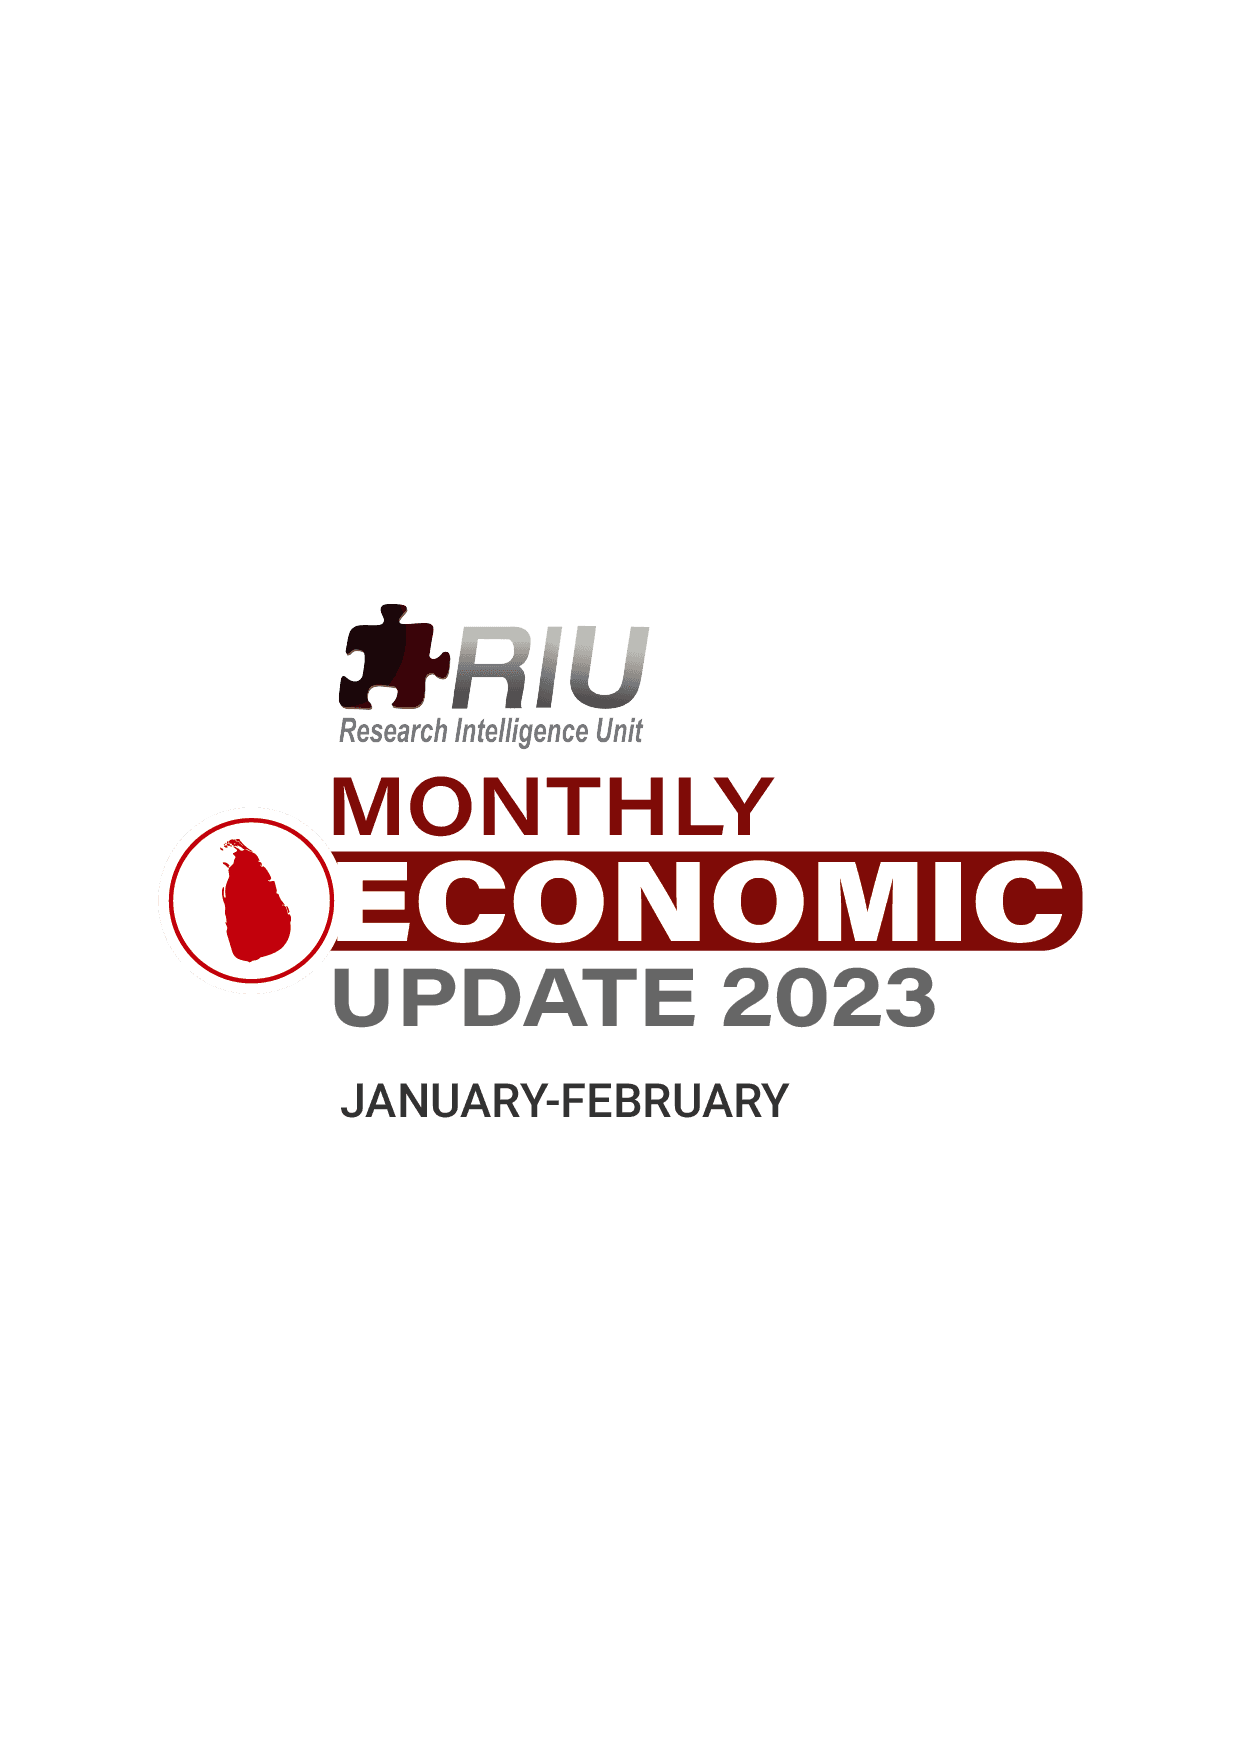 Product Economic Update for January – February 2023 - Riunit image